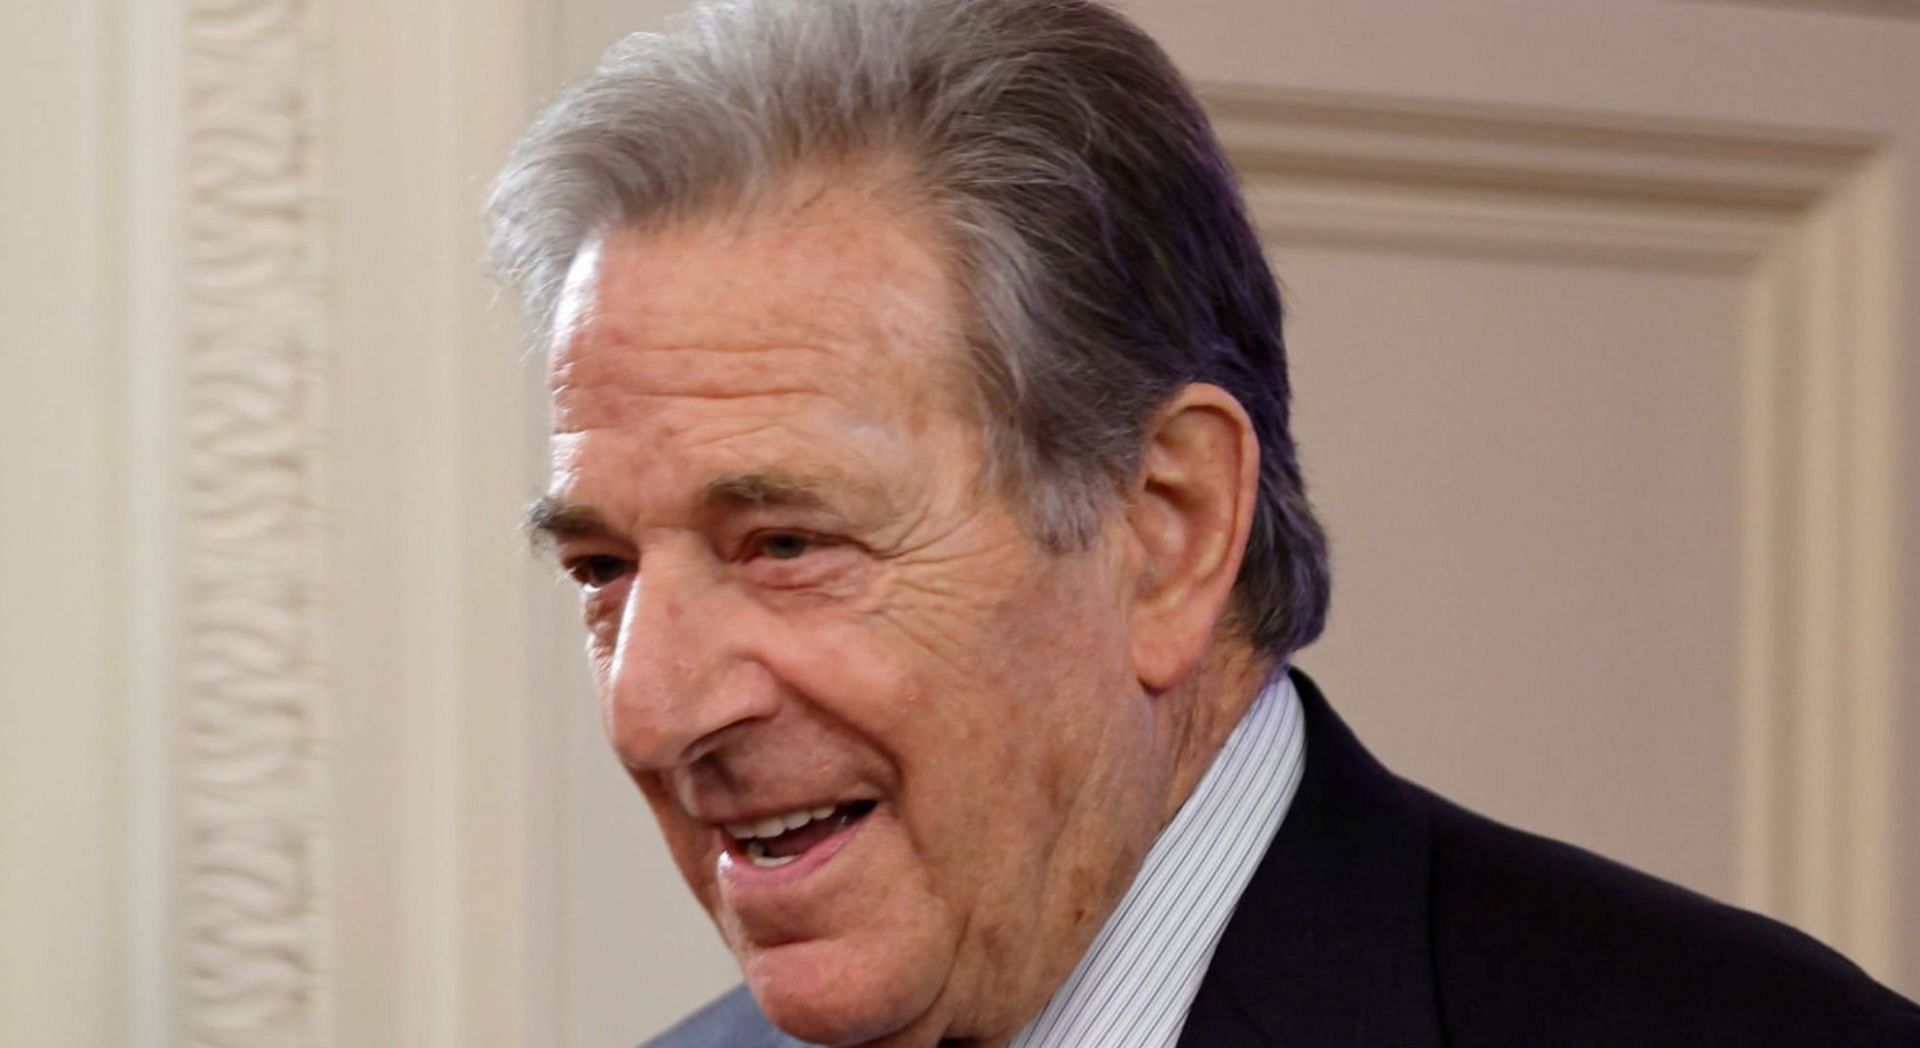 Officials released bodycam footage showing hammer attack on Paul Pelosi (Image via Getty Images)